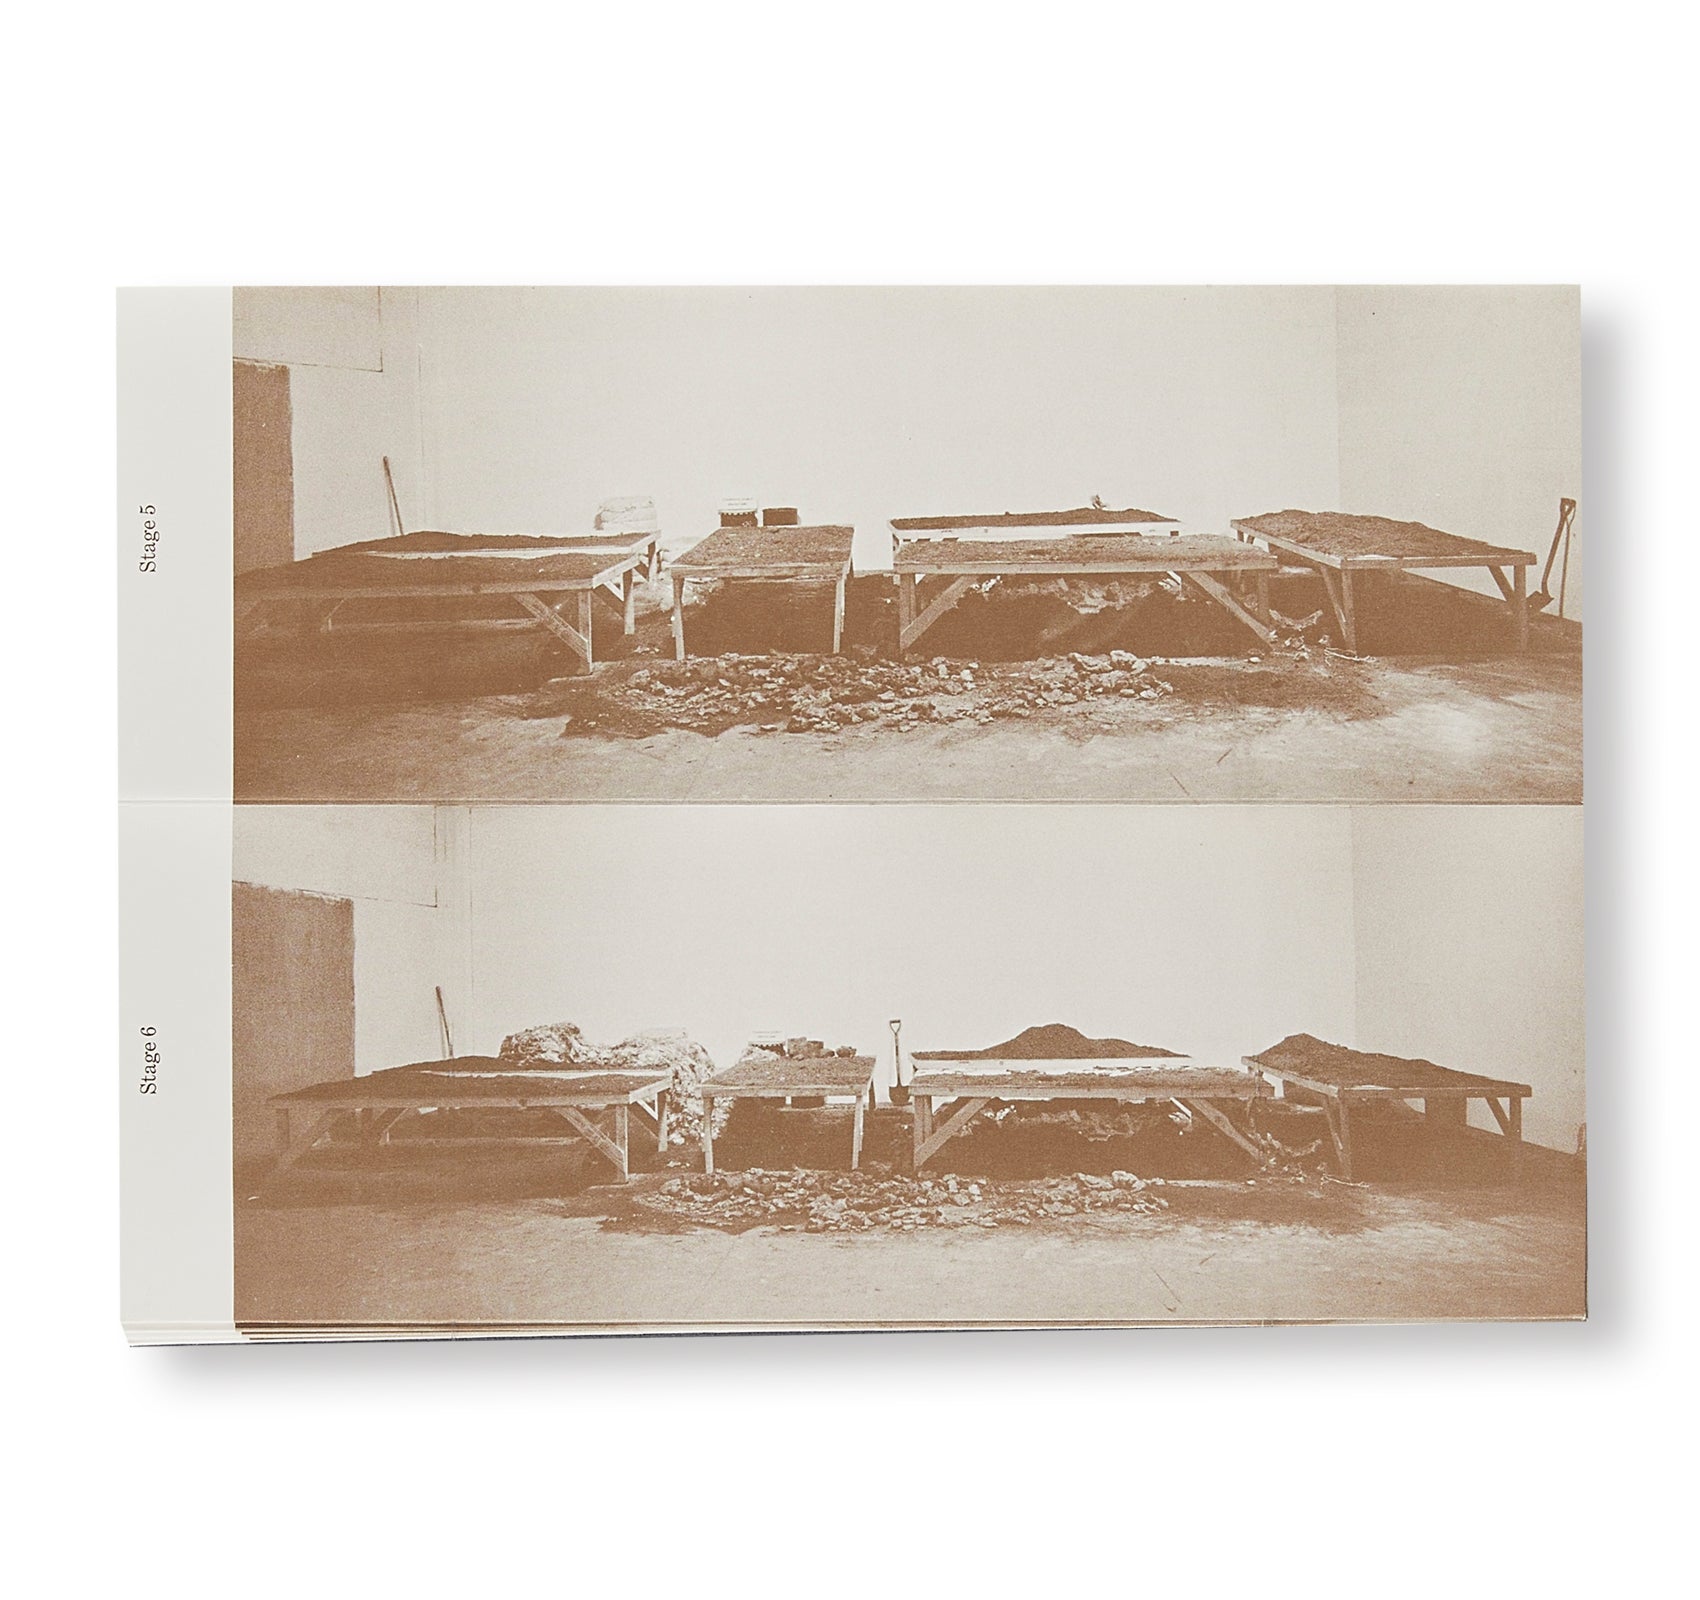 CONTINUOUS PROJECT ALTERED DAILY, 1969 by Robert Morris